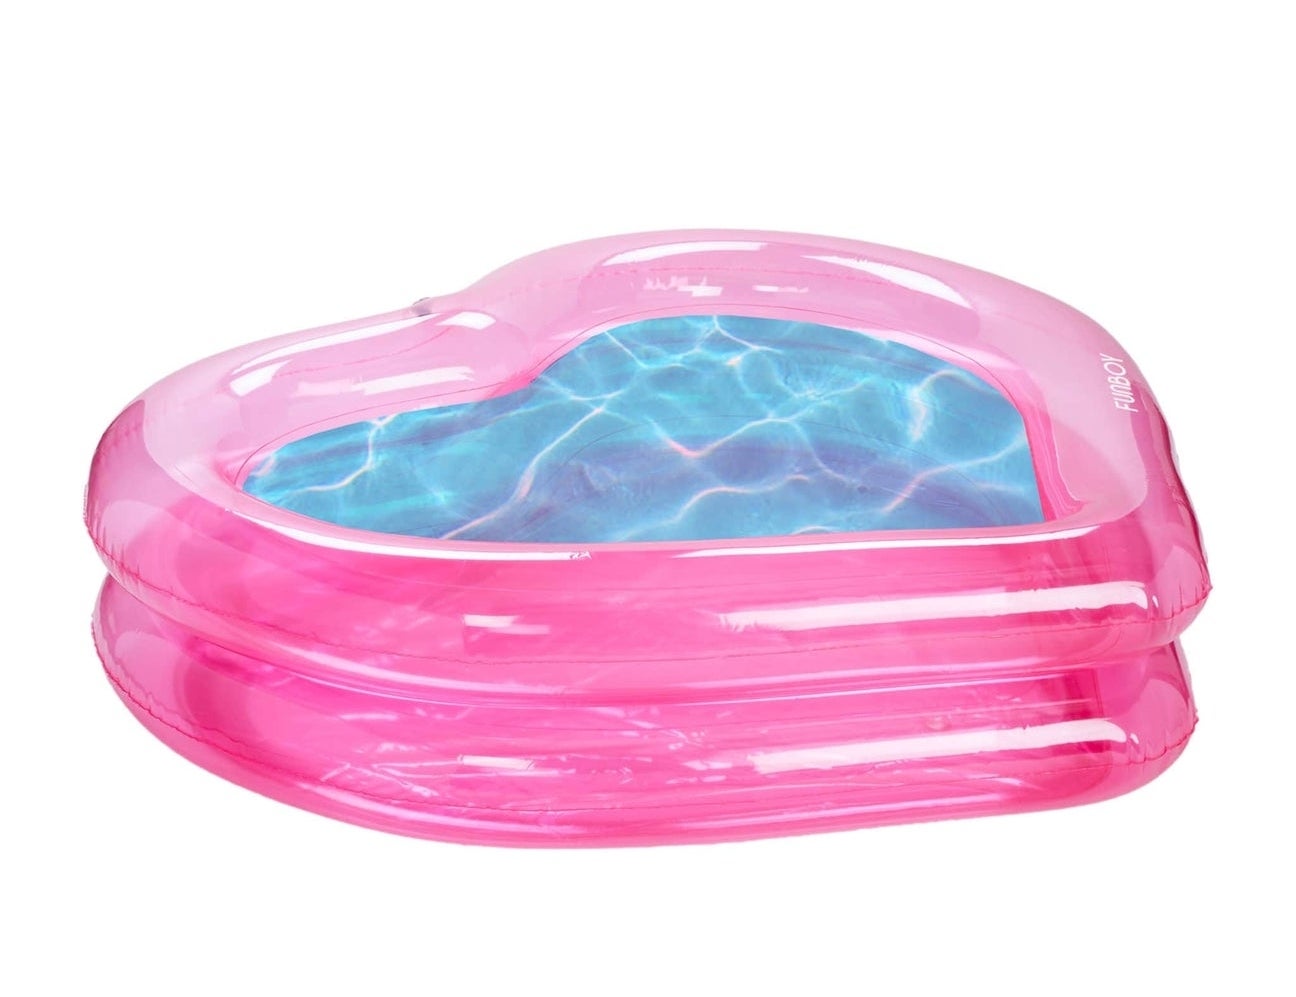 Inflatable pink pool float in the shape of a lip, with a blue-patterned center, showcased for purchase